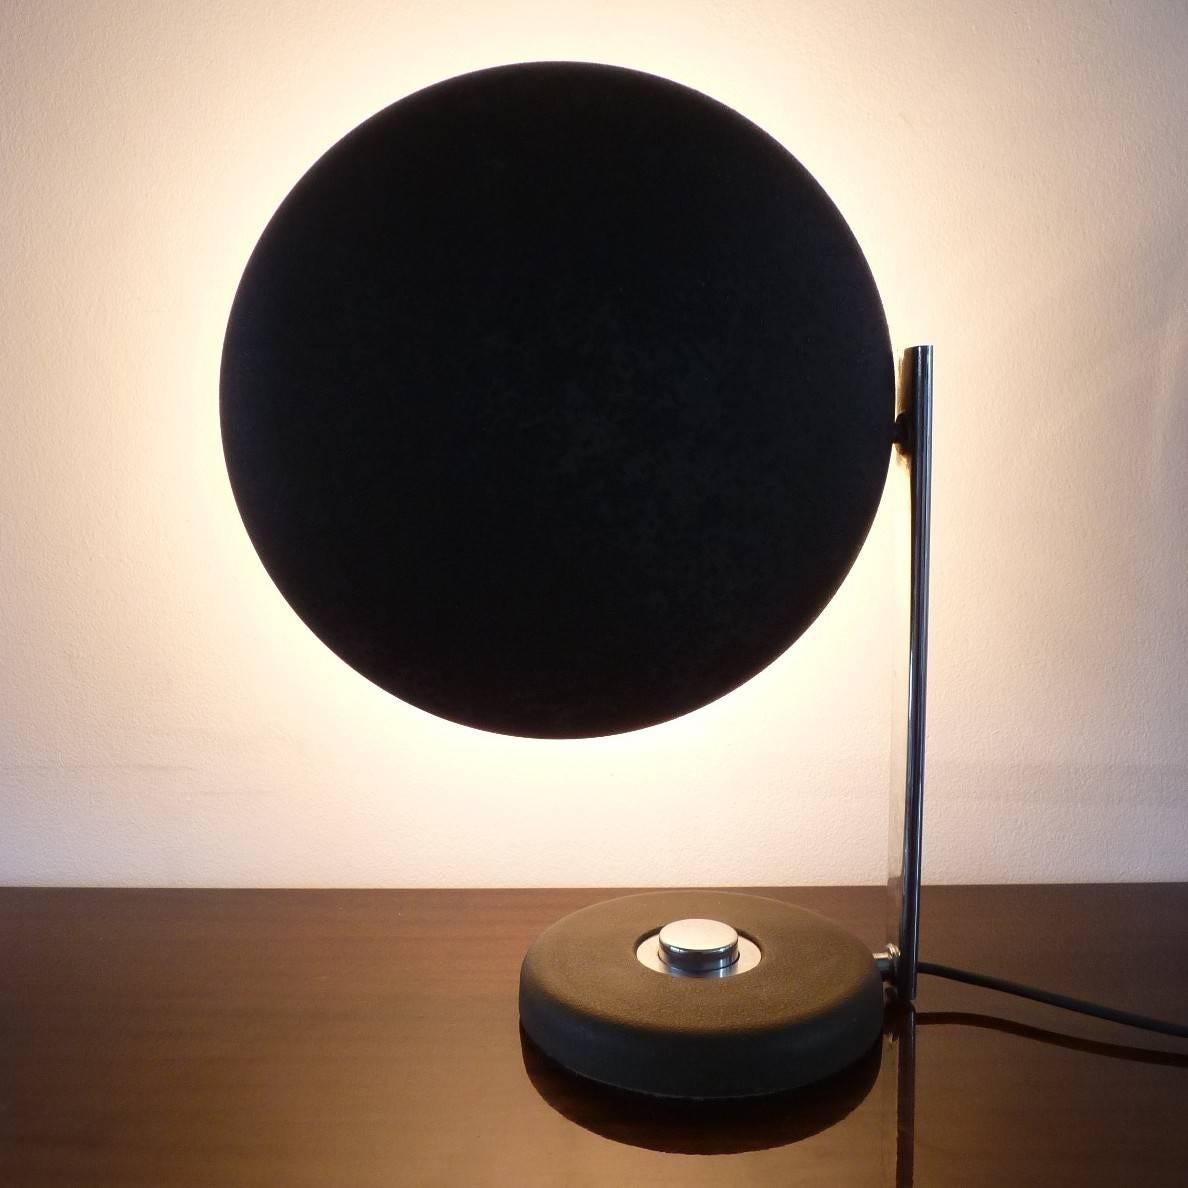 Oslo desk lamp by Heinz Pfaender from Hillebrand. From 1962. You can swivel and focus the hood of this desk lamp (see pictures). Striking on the lamps of Hillebrand is the good quality and the push button in the middle of the foot. The lamp has two